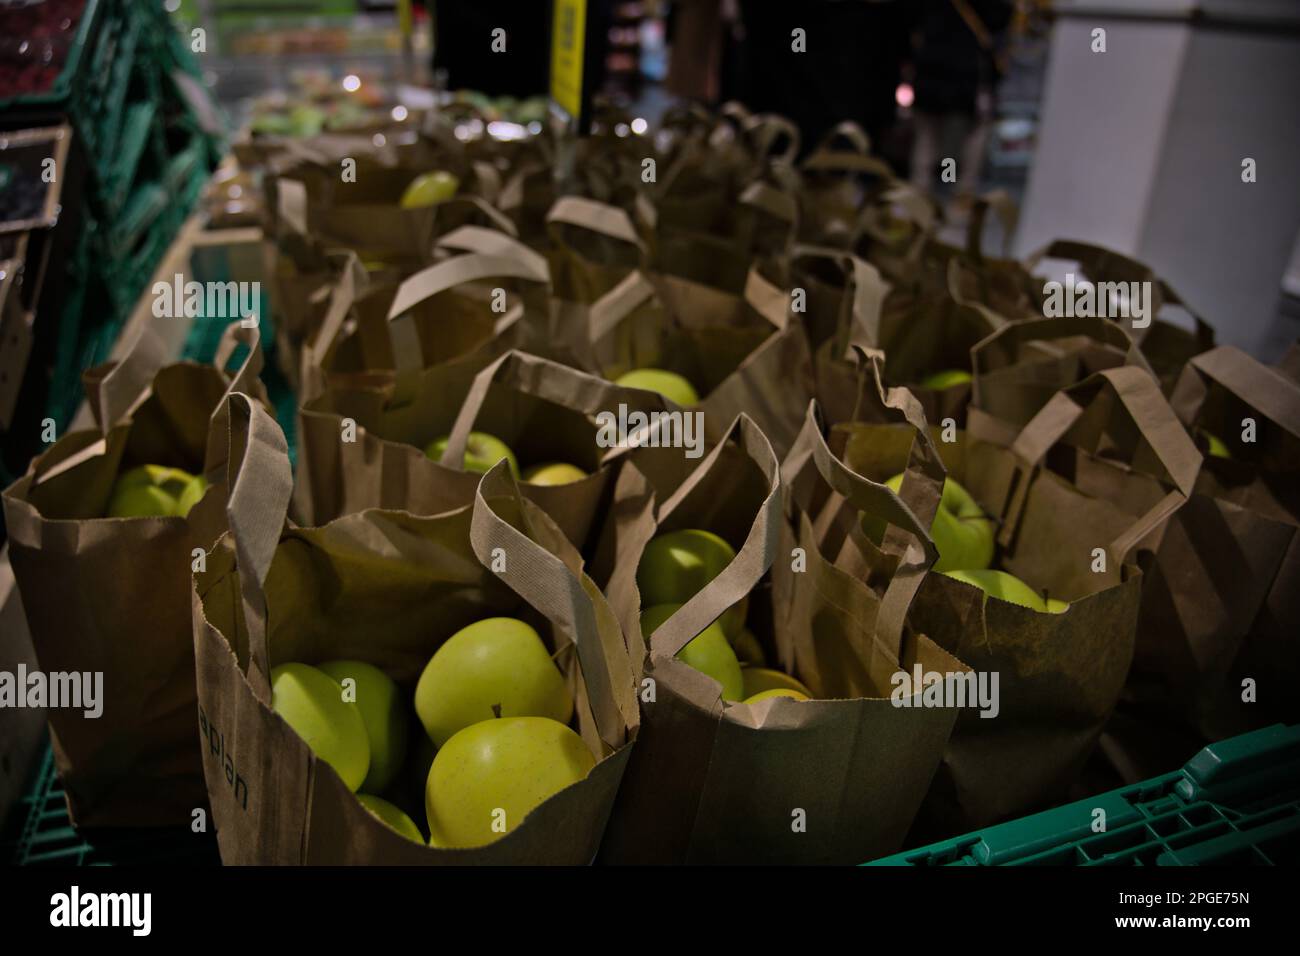 Discounted brown bagged granny smith apples ready to go Stock Photo